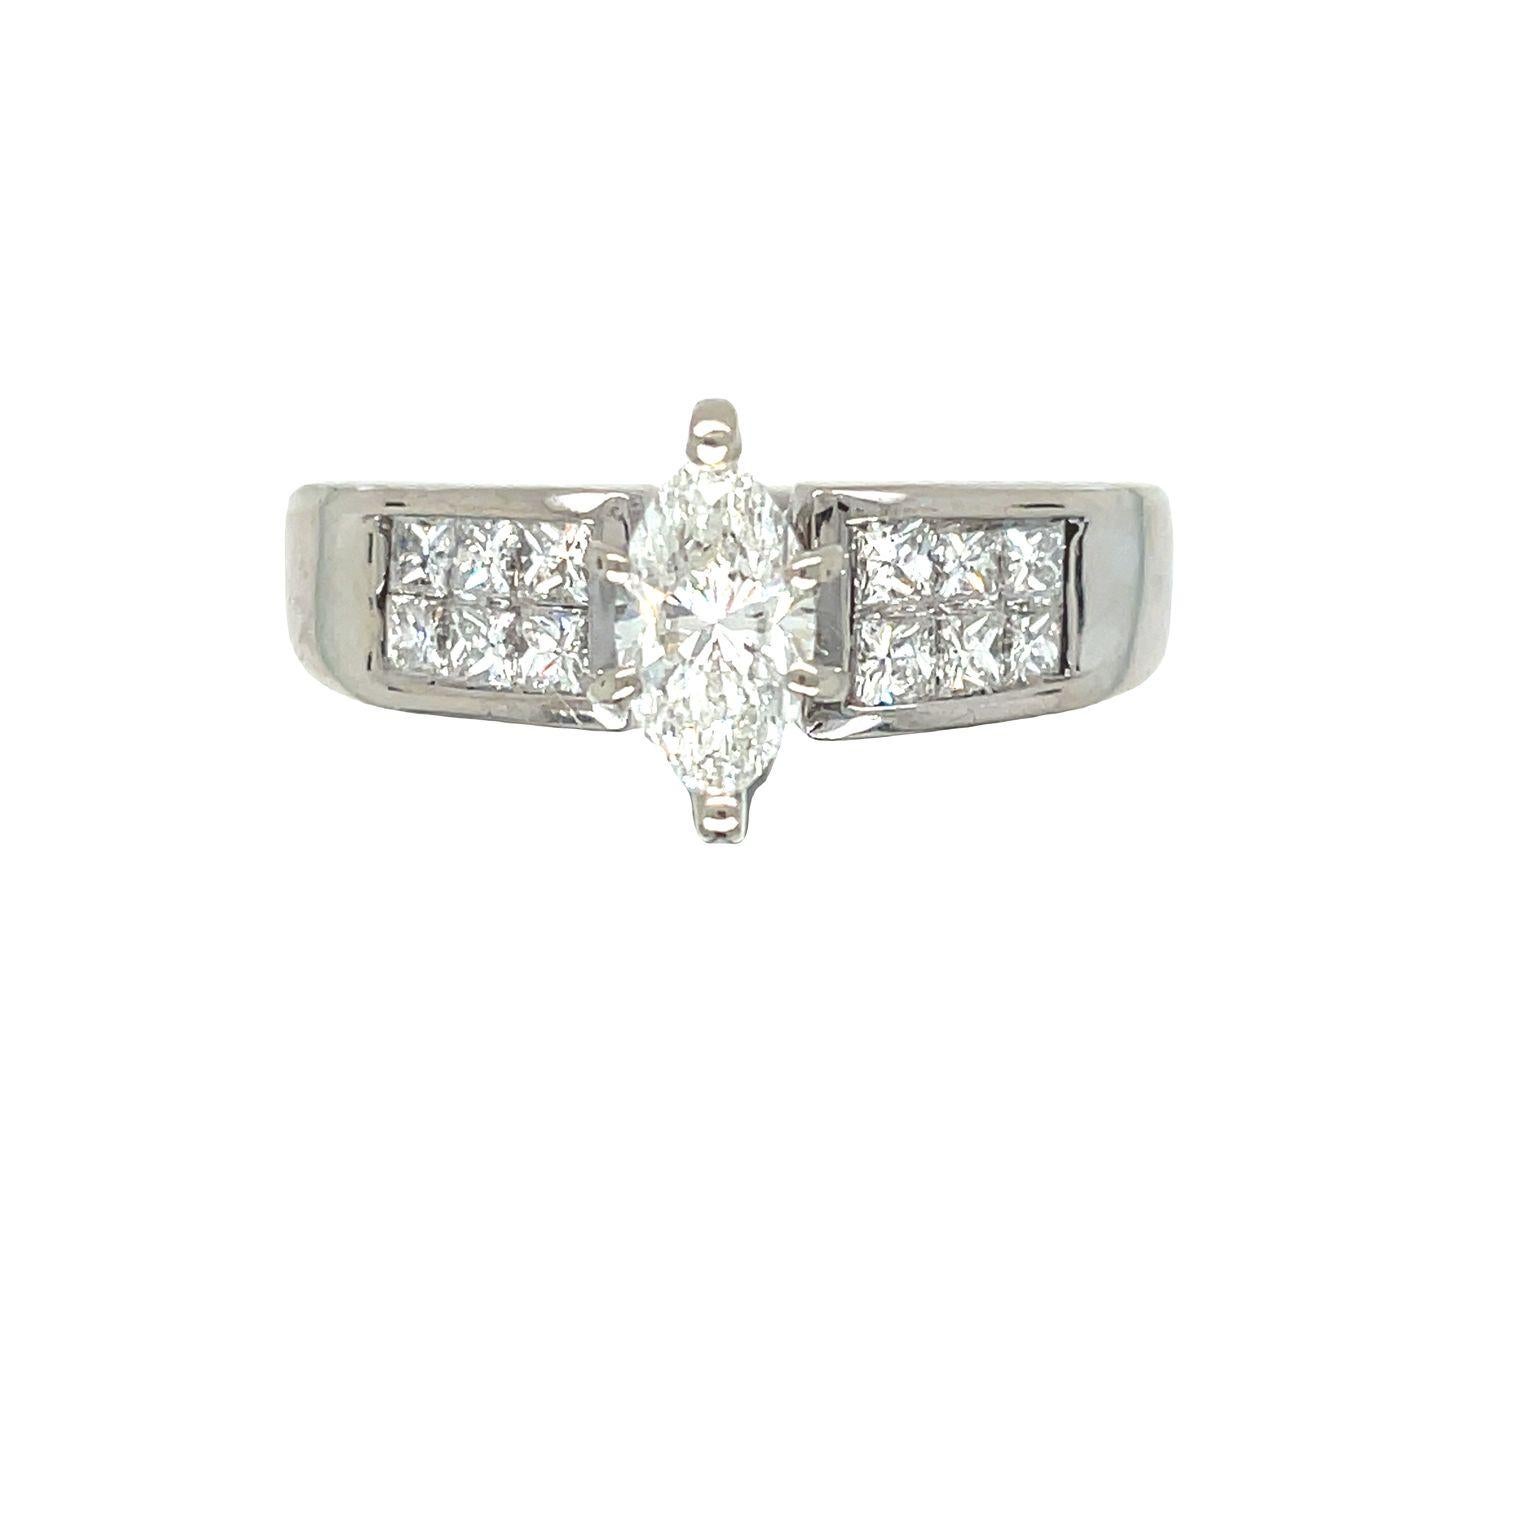 A stunning vintage engagement ring featuring a sparkling marquise cut diamond at the center weighing 0.75 carats, held in a six-prong setting that rises above the rest of the ring. The shank is adorned with two rows of princess cut diamonds,